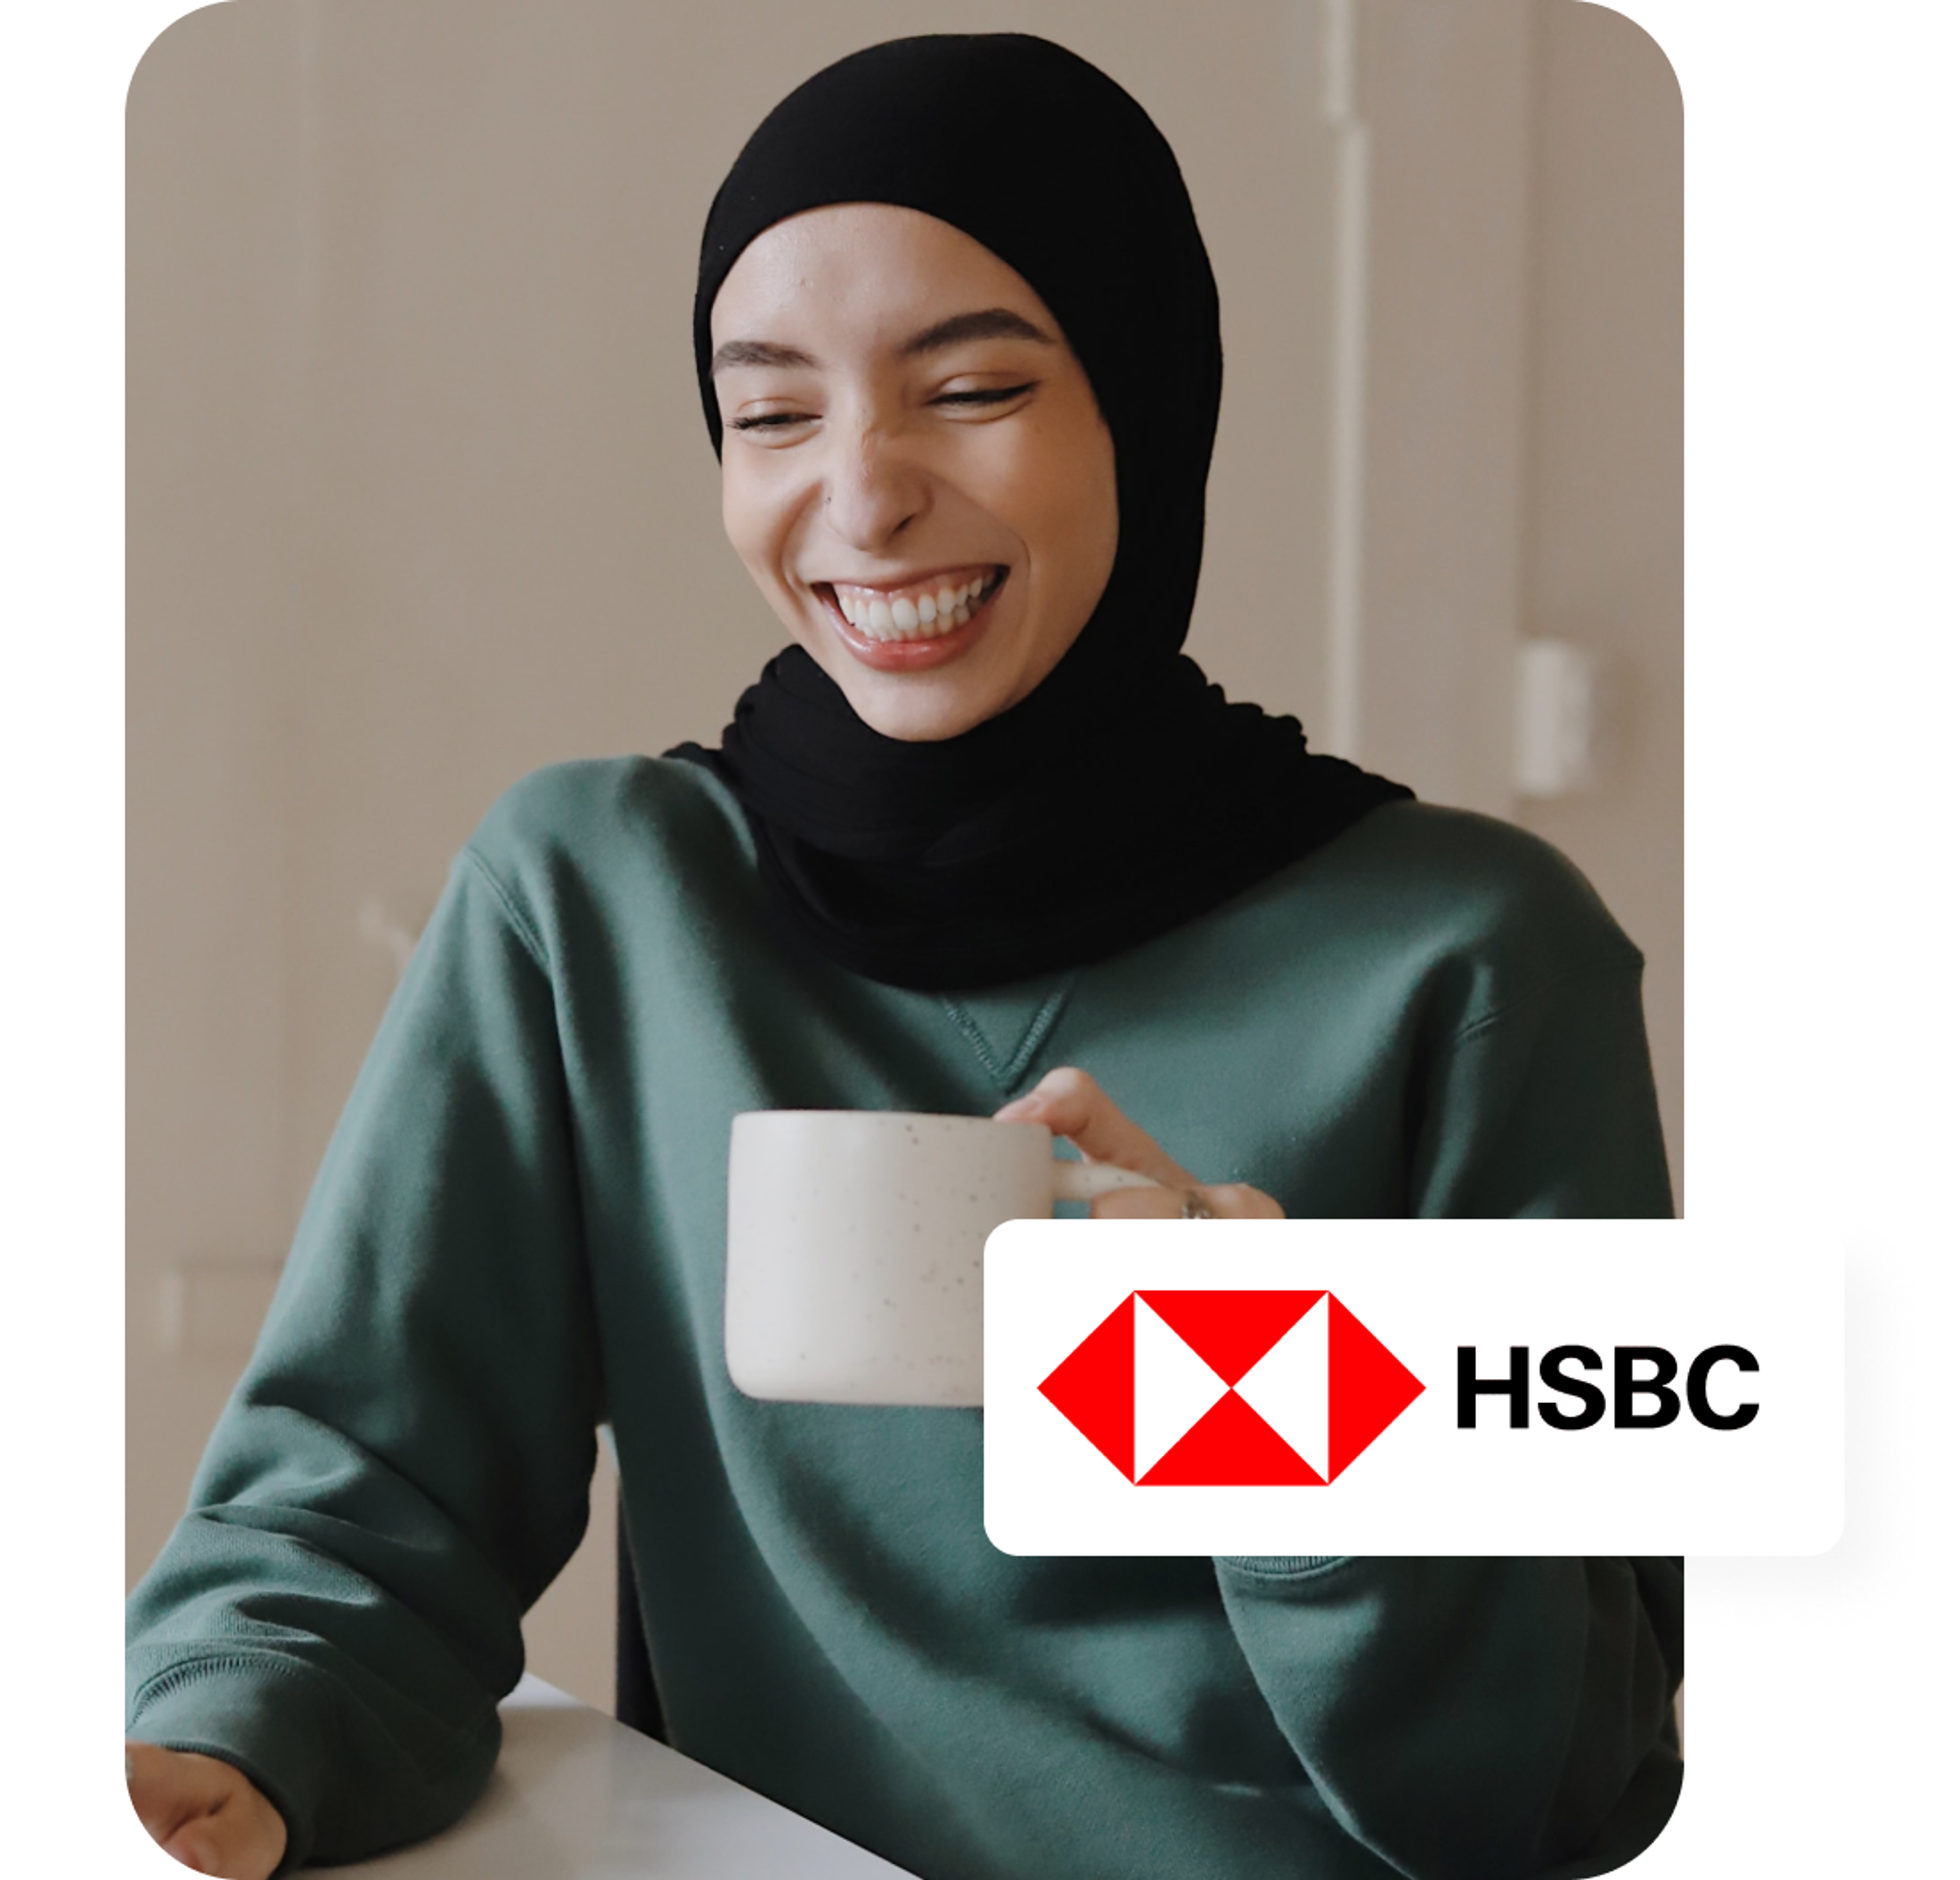 A photo of a smiling woman holding a mug and the HSBC logo